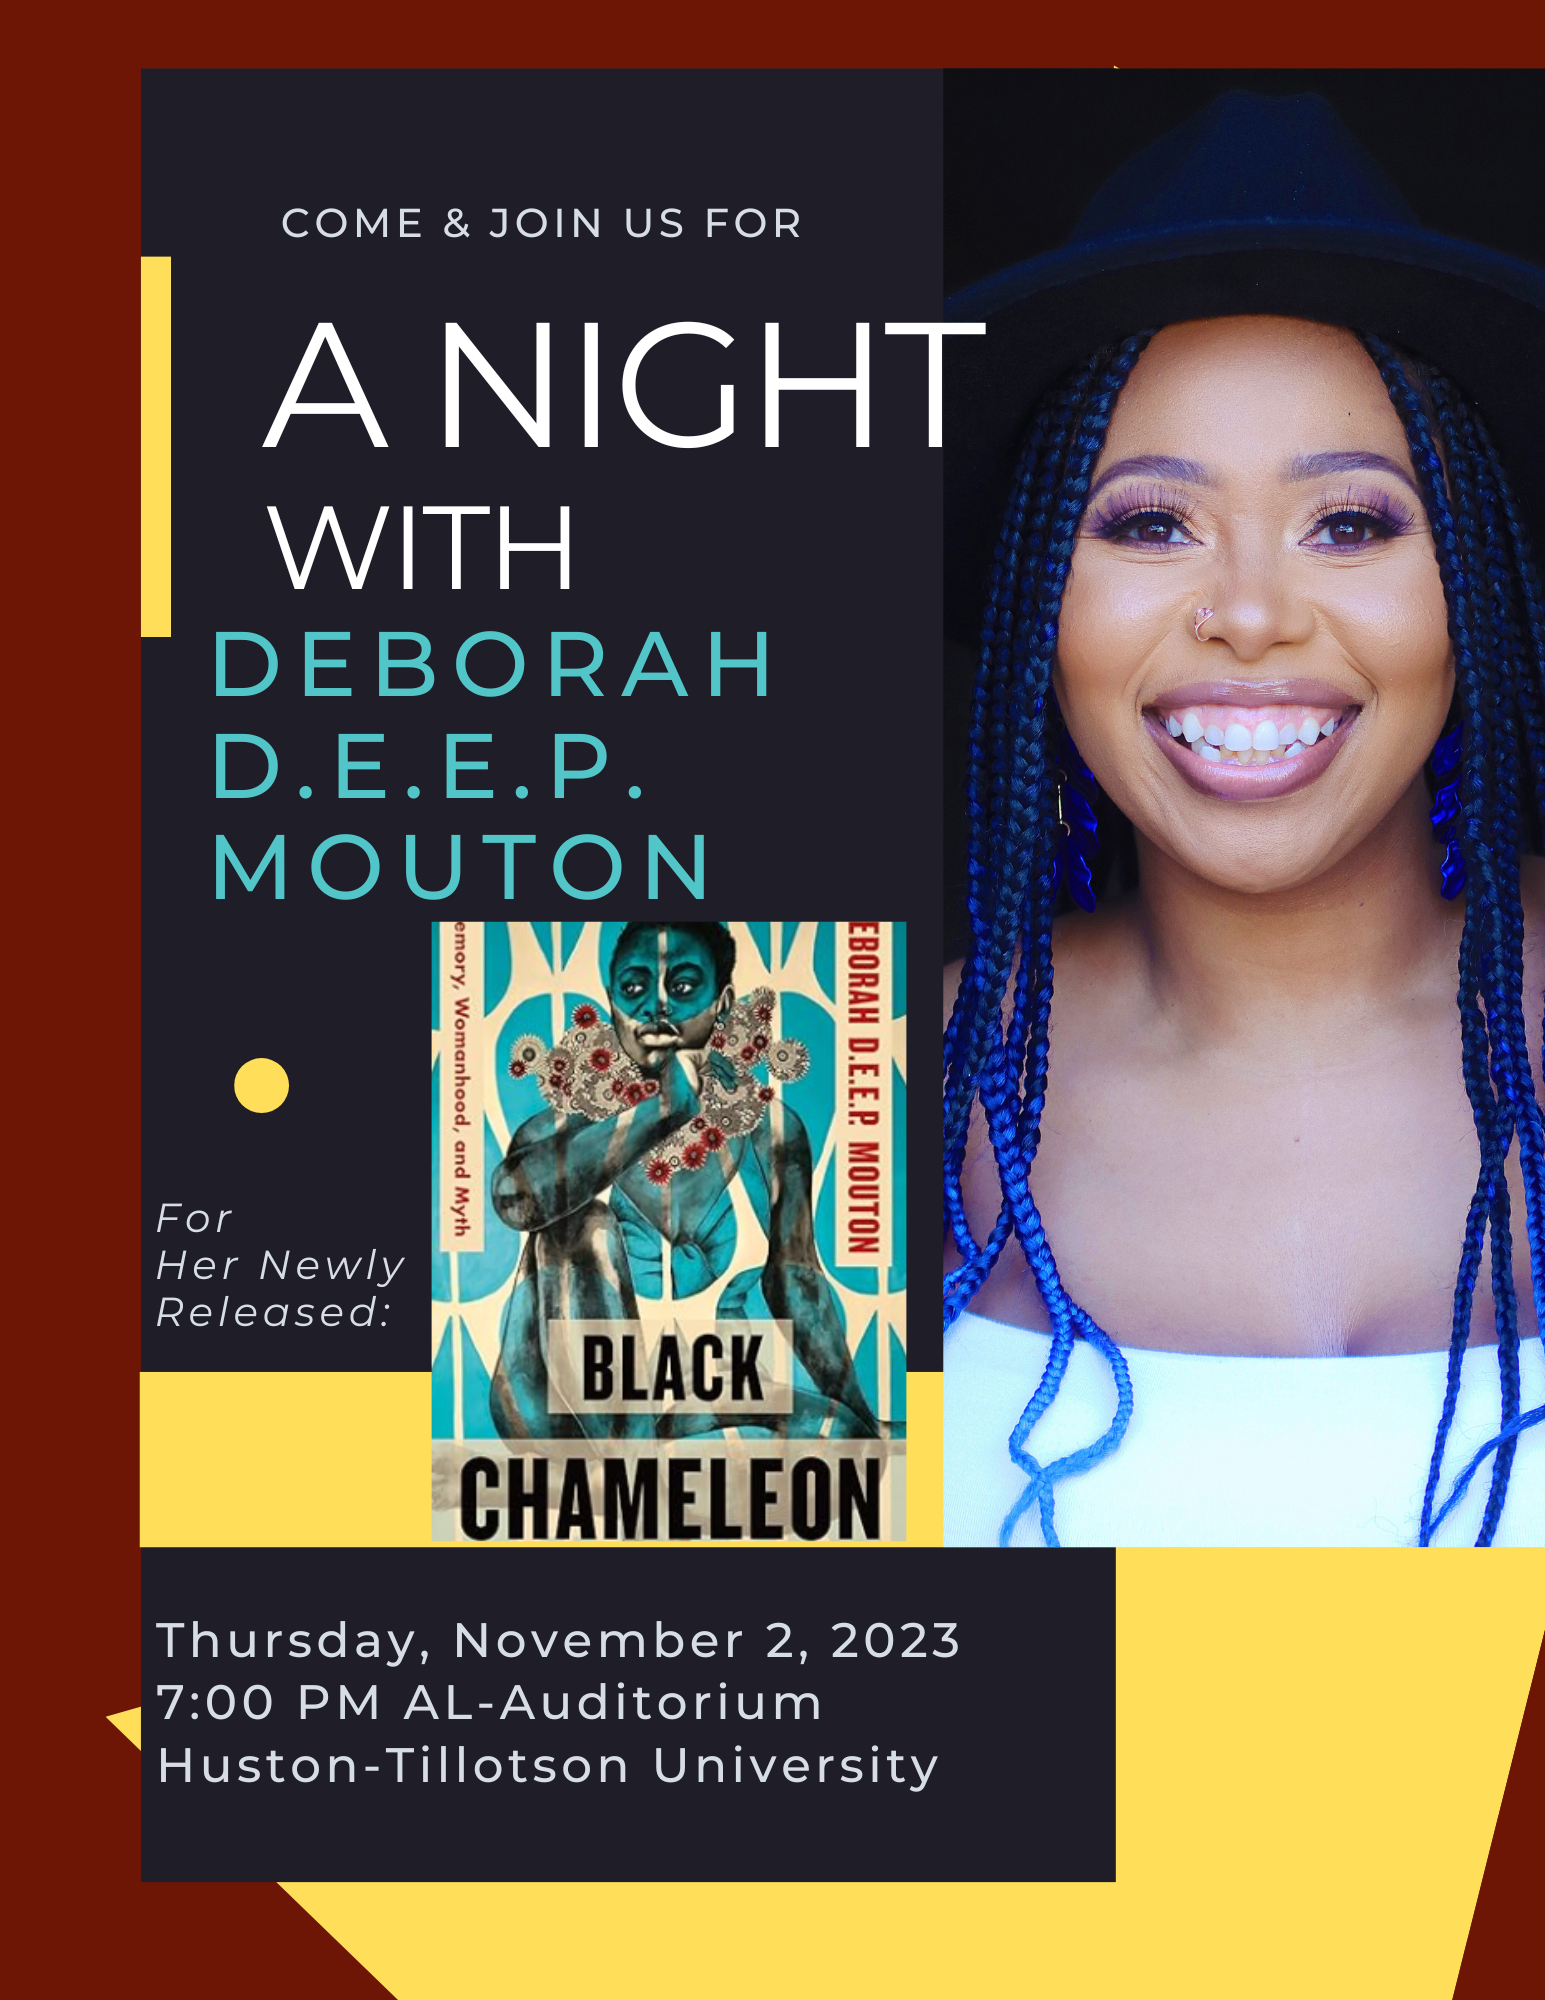 Poster promotes "A Night with Deborah D.E.E.P. Mouton discussing the book Black Chameleon on November 2, 2023